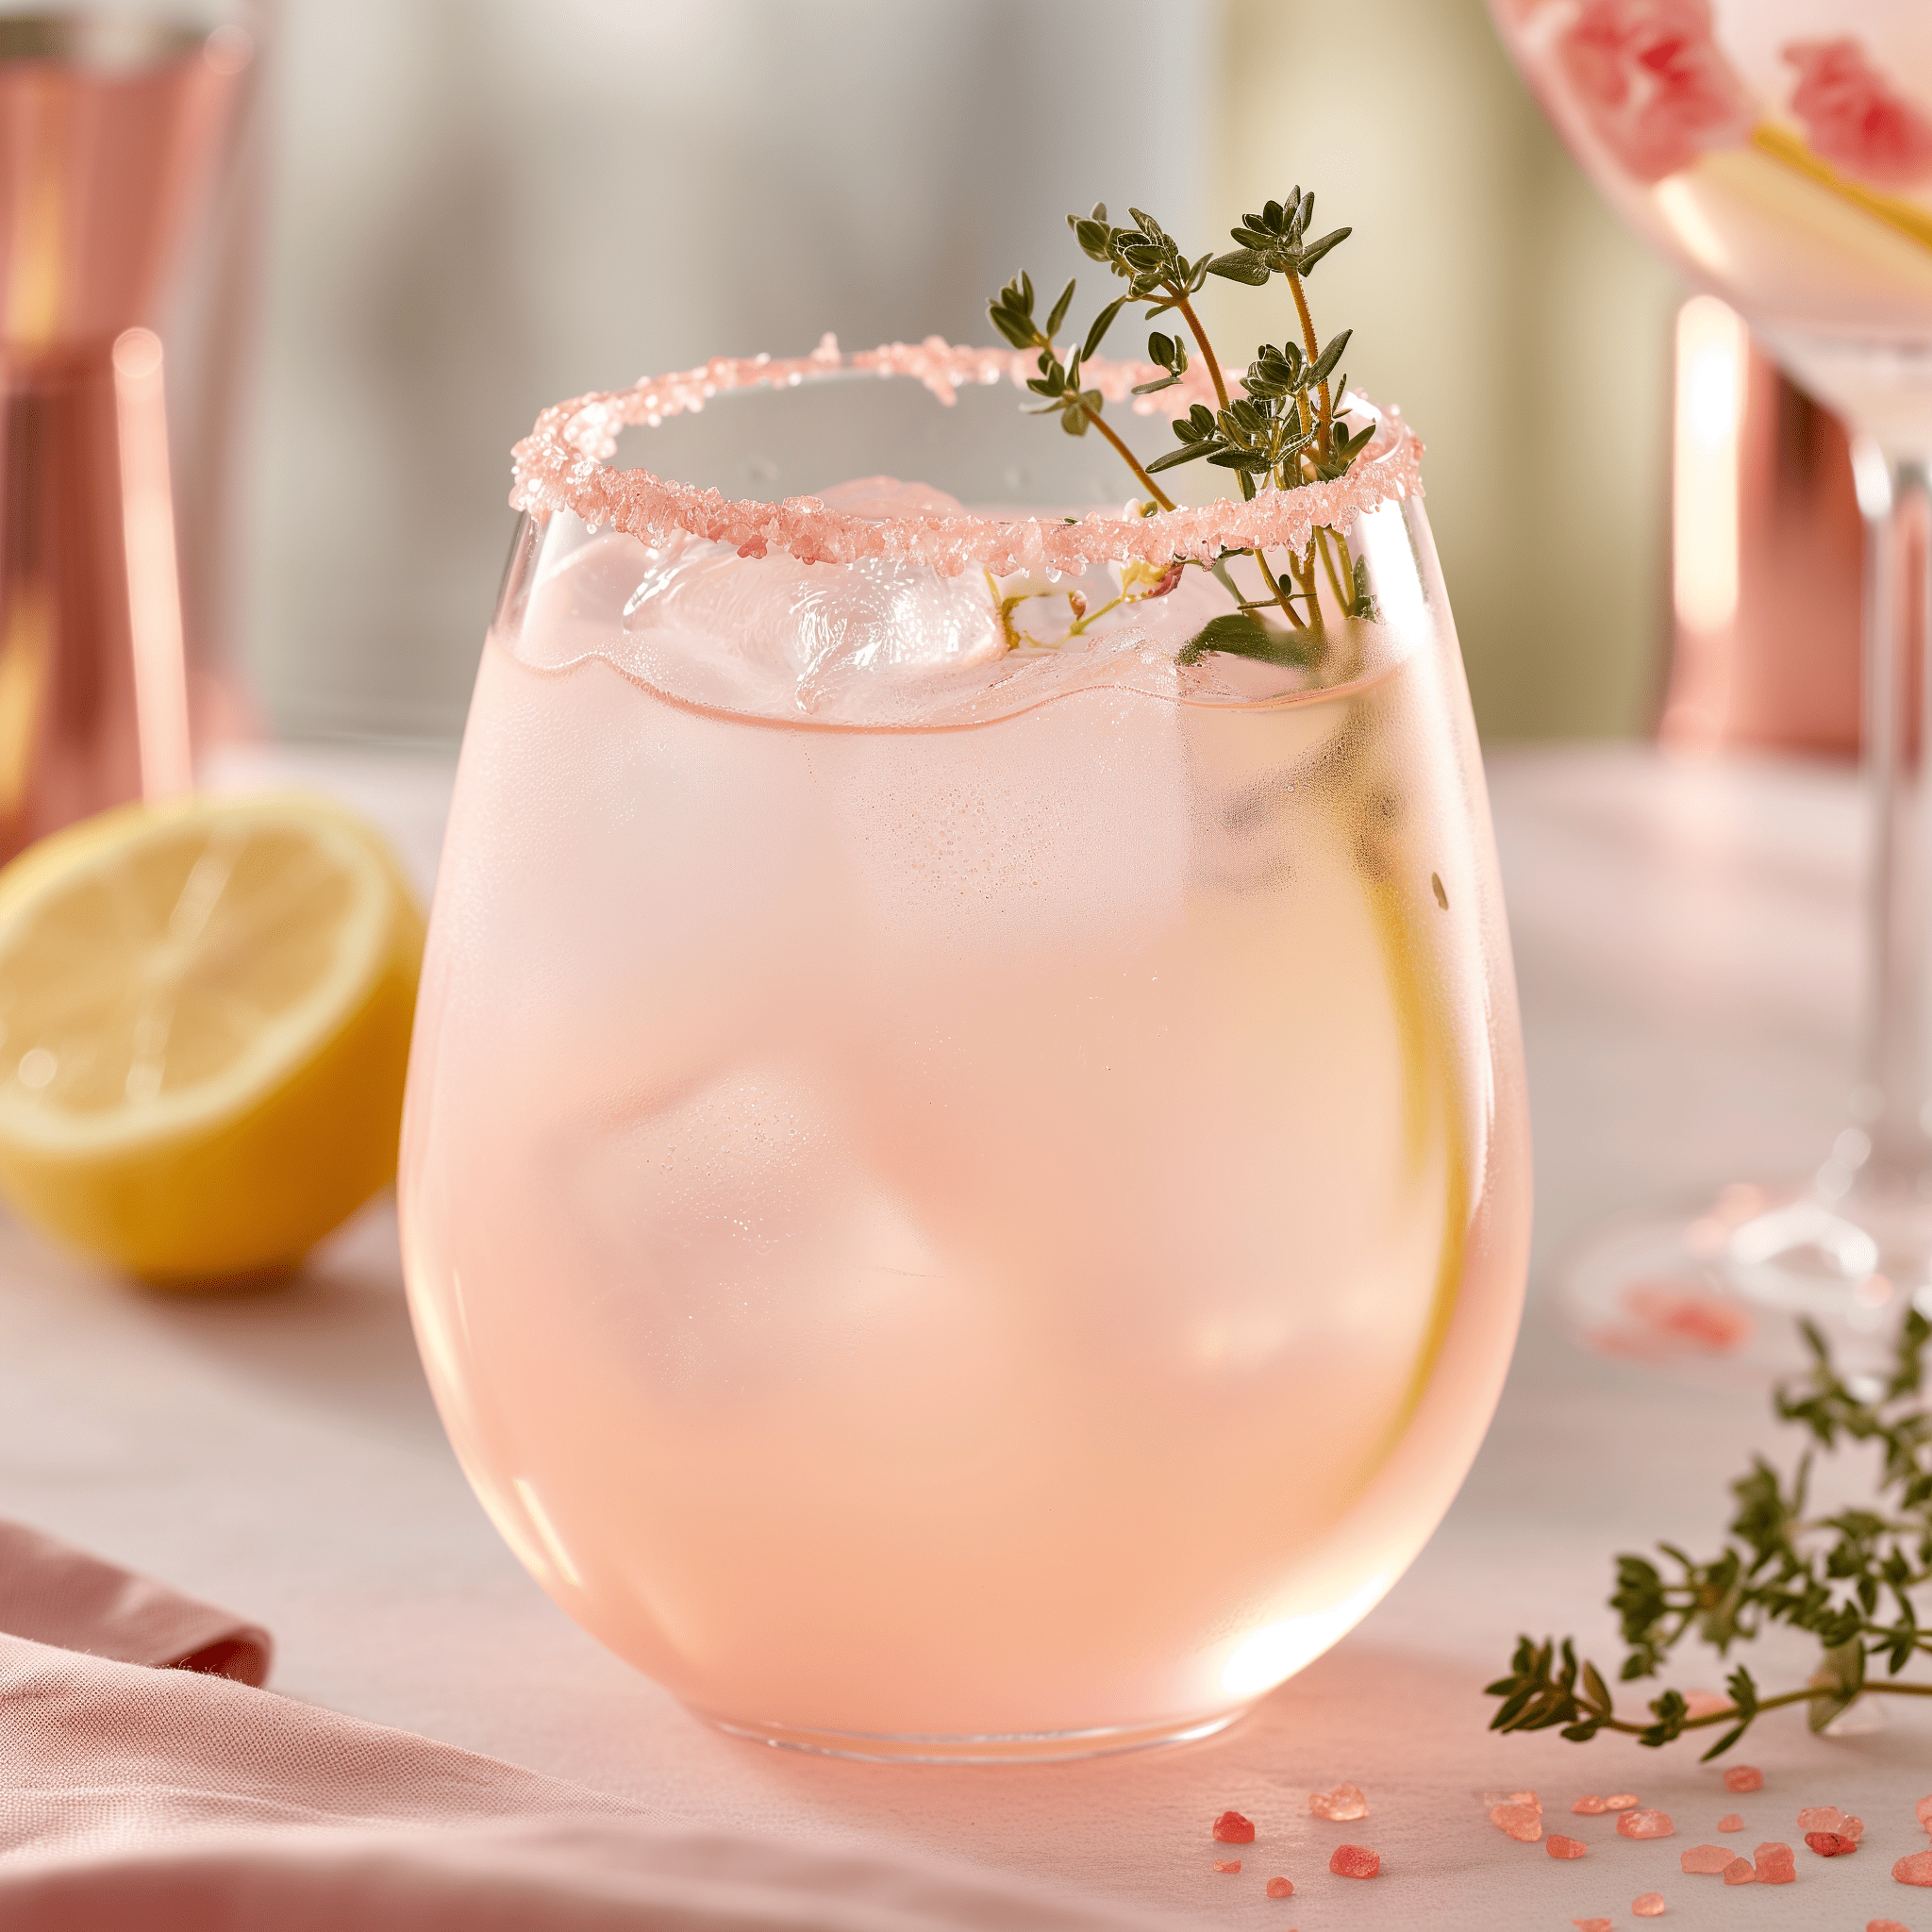 Rose Mocktail Recipe - The Rose Mocktail offers a refreshing and slightly tangy taste with a sweet floral undertone. The effervescence of soda water adds a lightness to the drink, while the thyme provides an earthy note that balances the sweetness of honey and the zing of ginger.